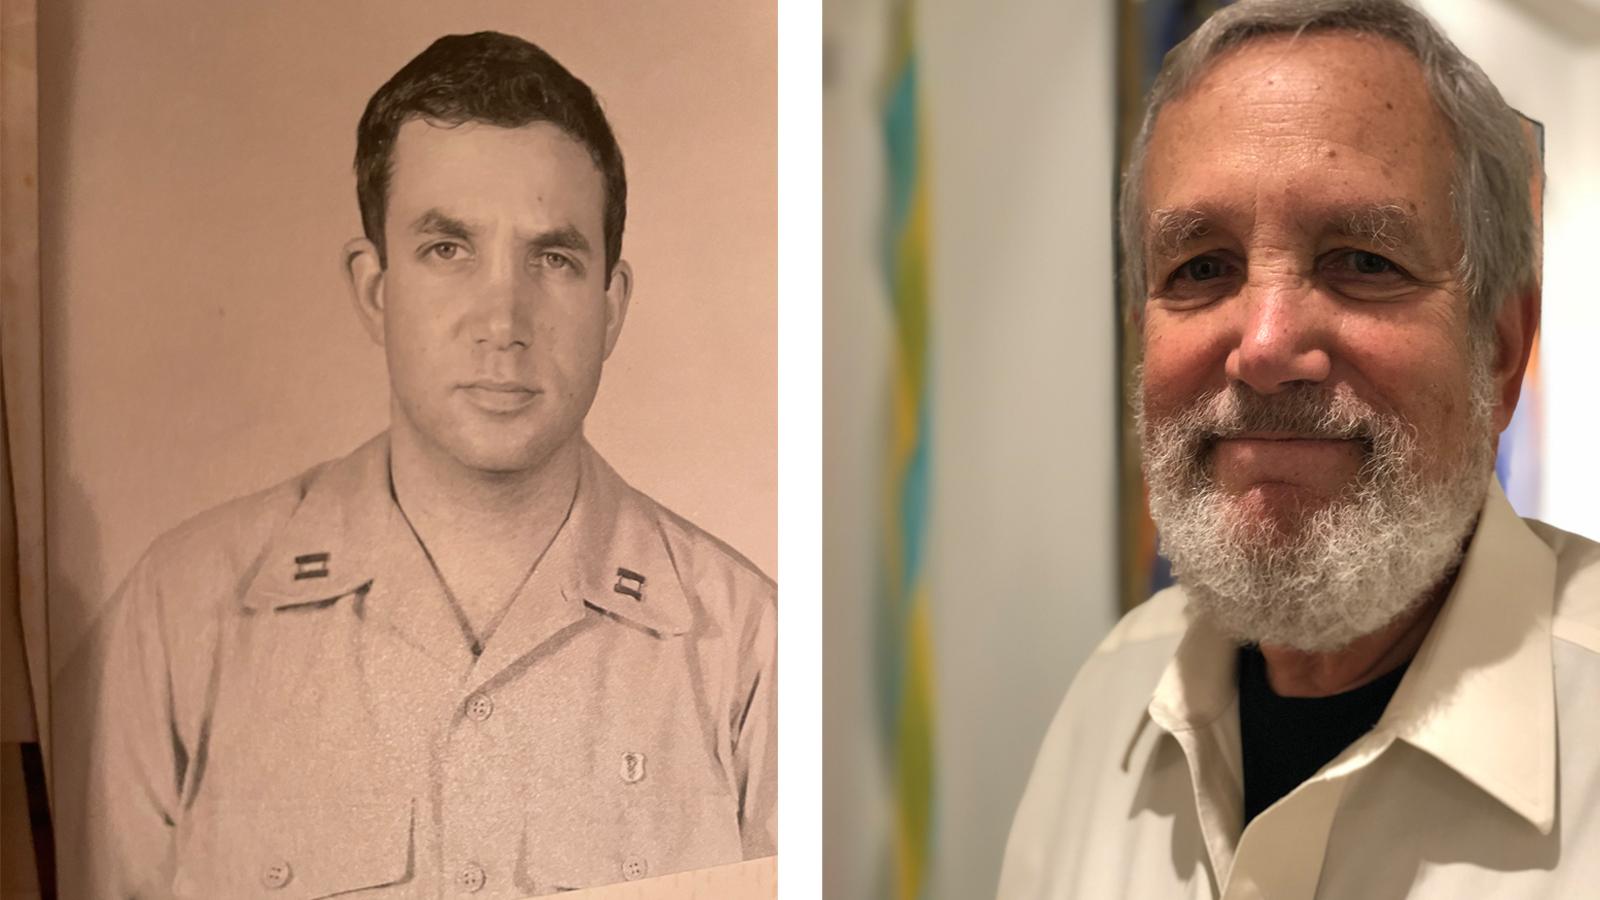 photos of Dr. Michael Rosen: in the Army in the 60s and present-day